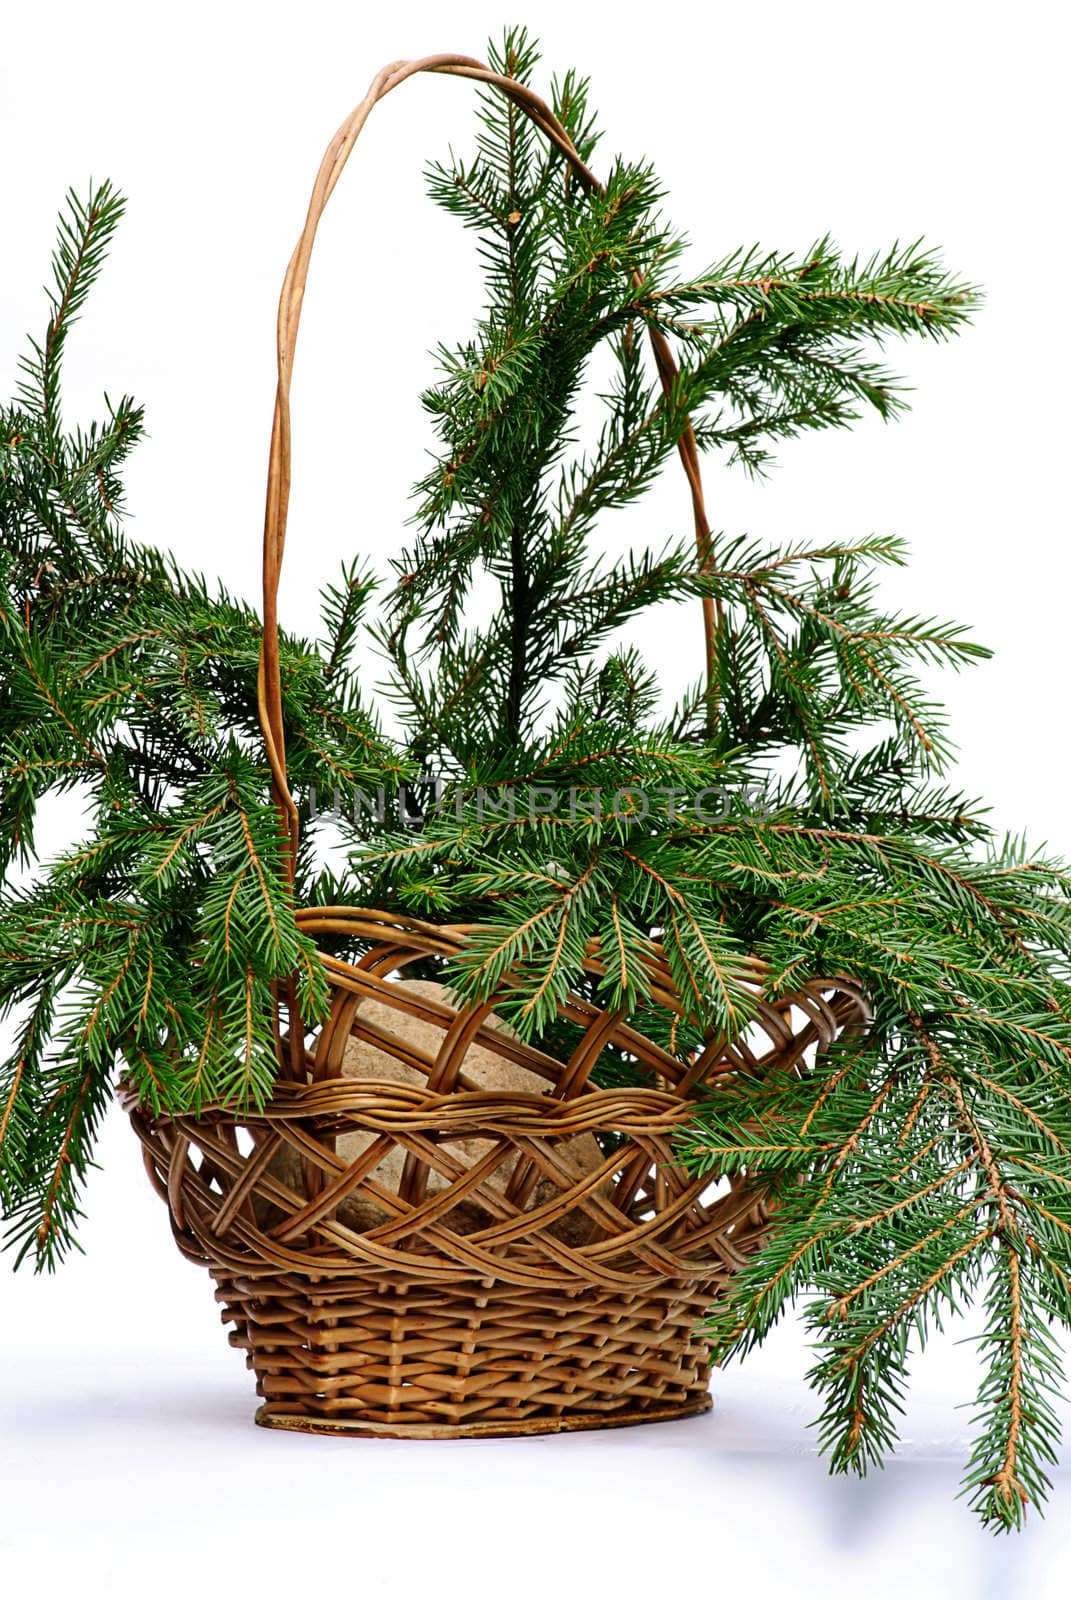 green branch fir tree in wooden  basket isolated